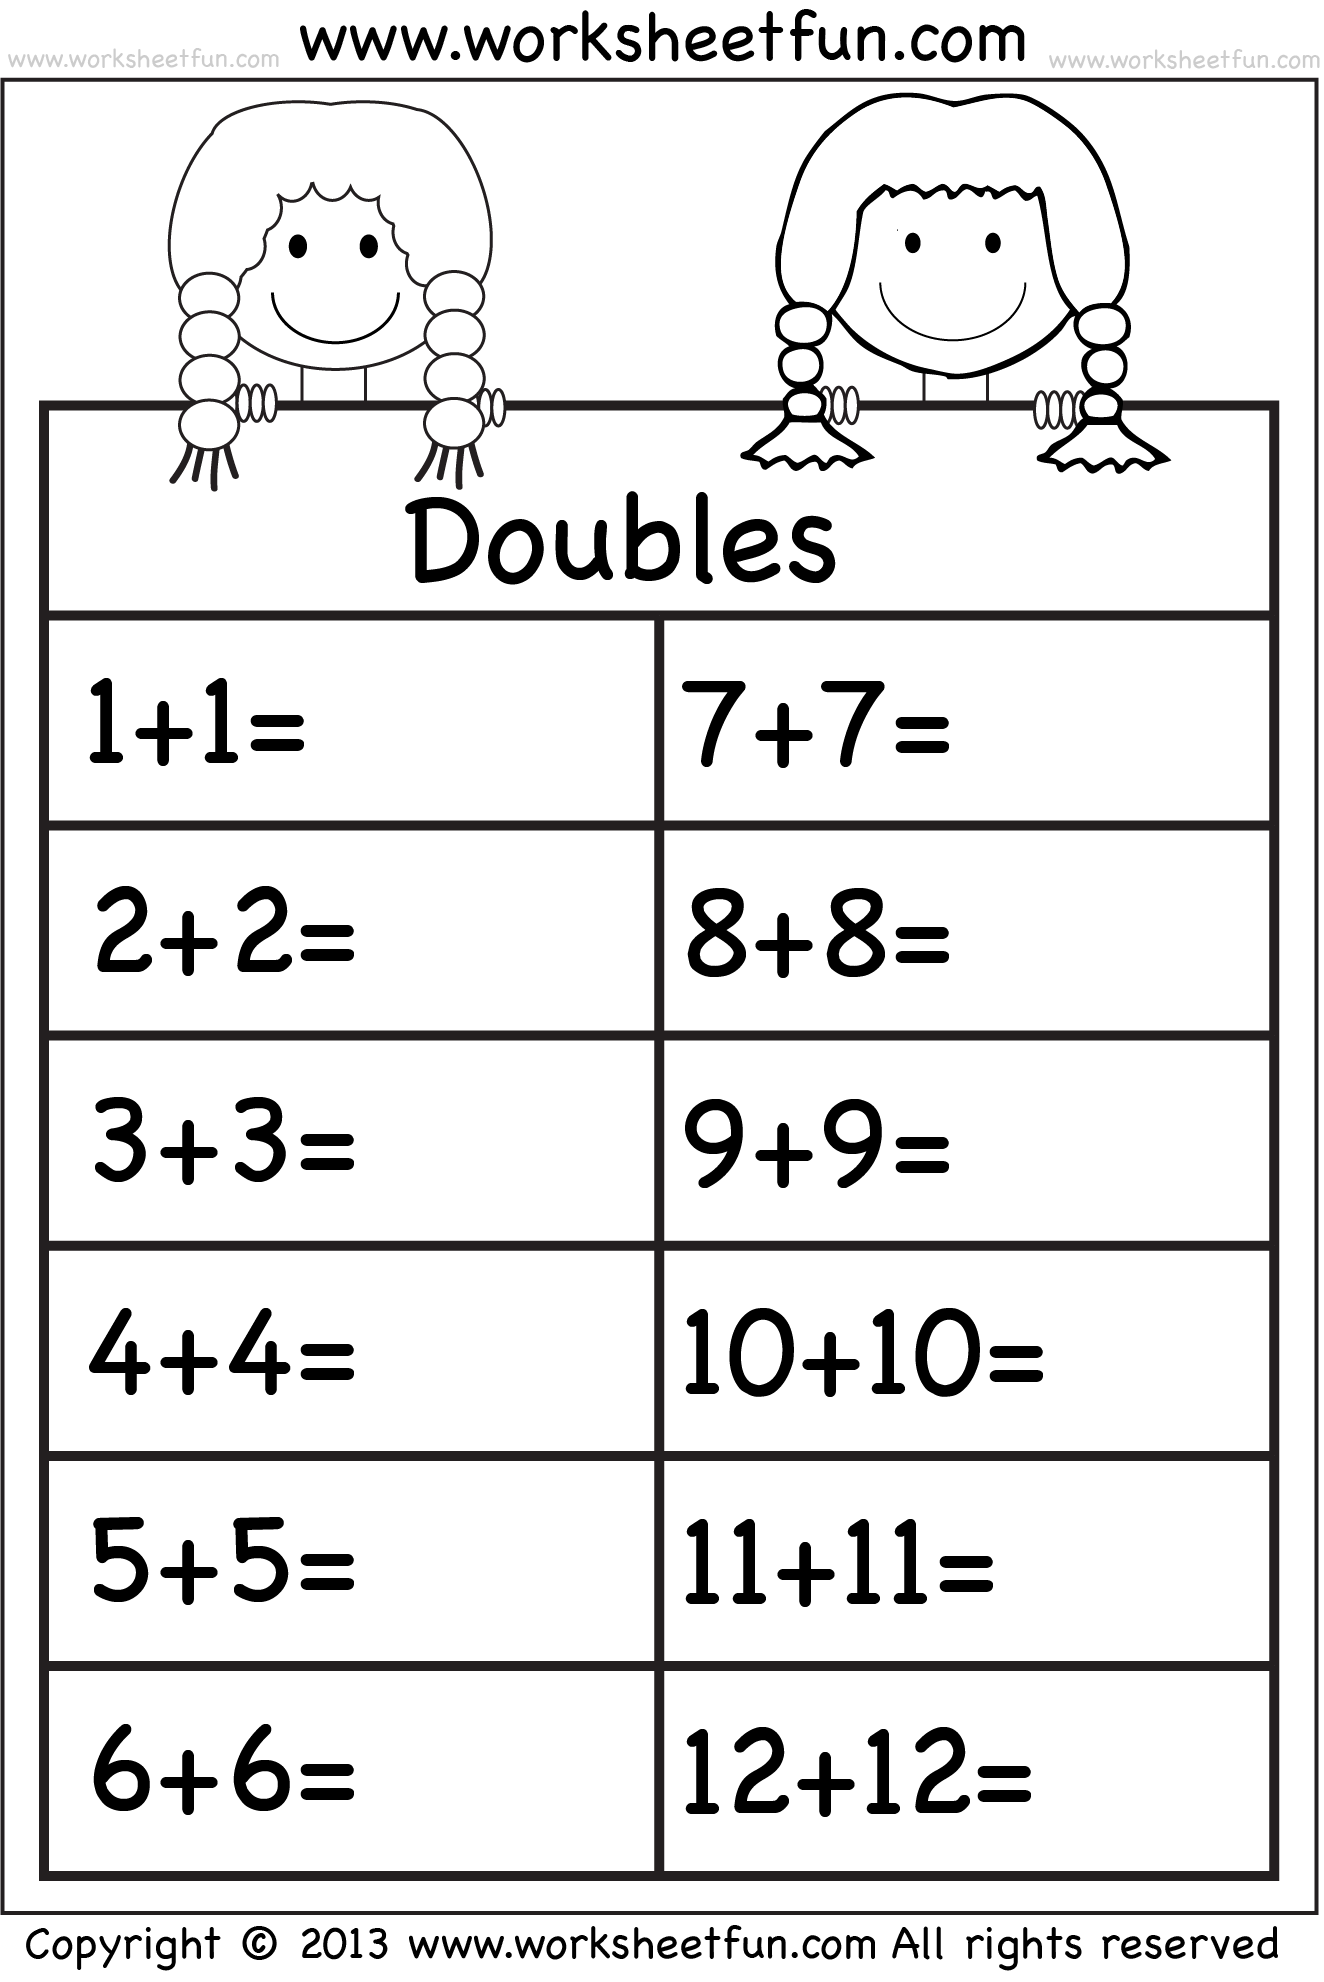 Addition Doubles – 11 Worksheet / FREE Printable Worksheets Throughout Doubles Plus One Worksheet